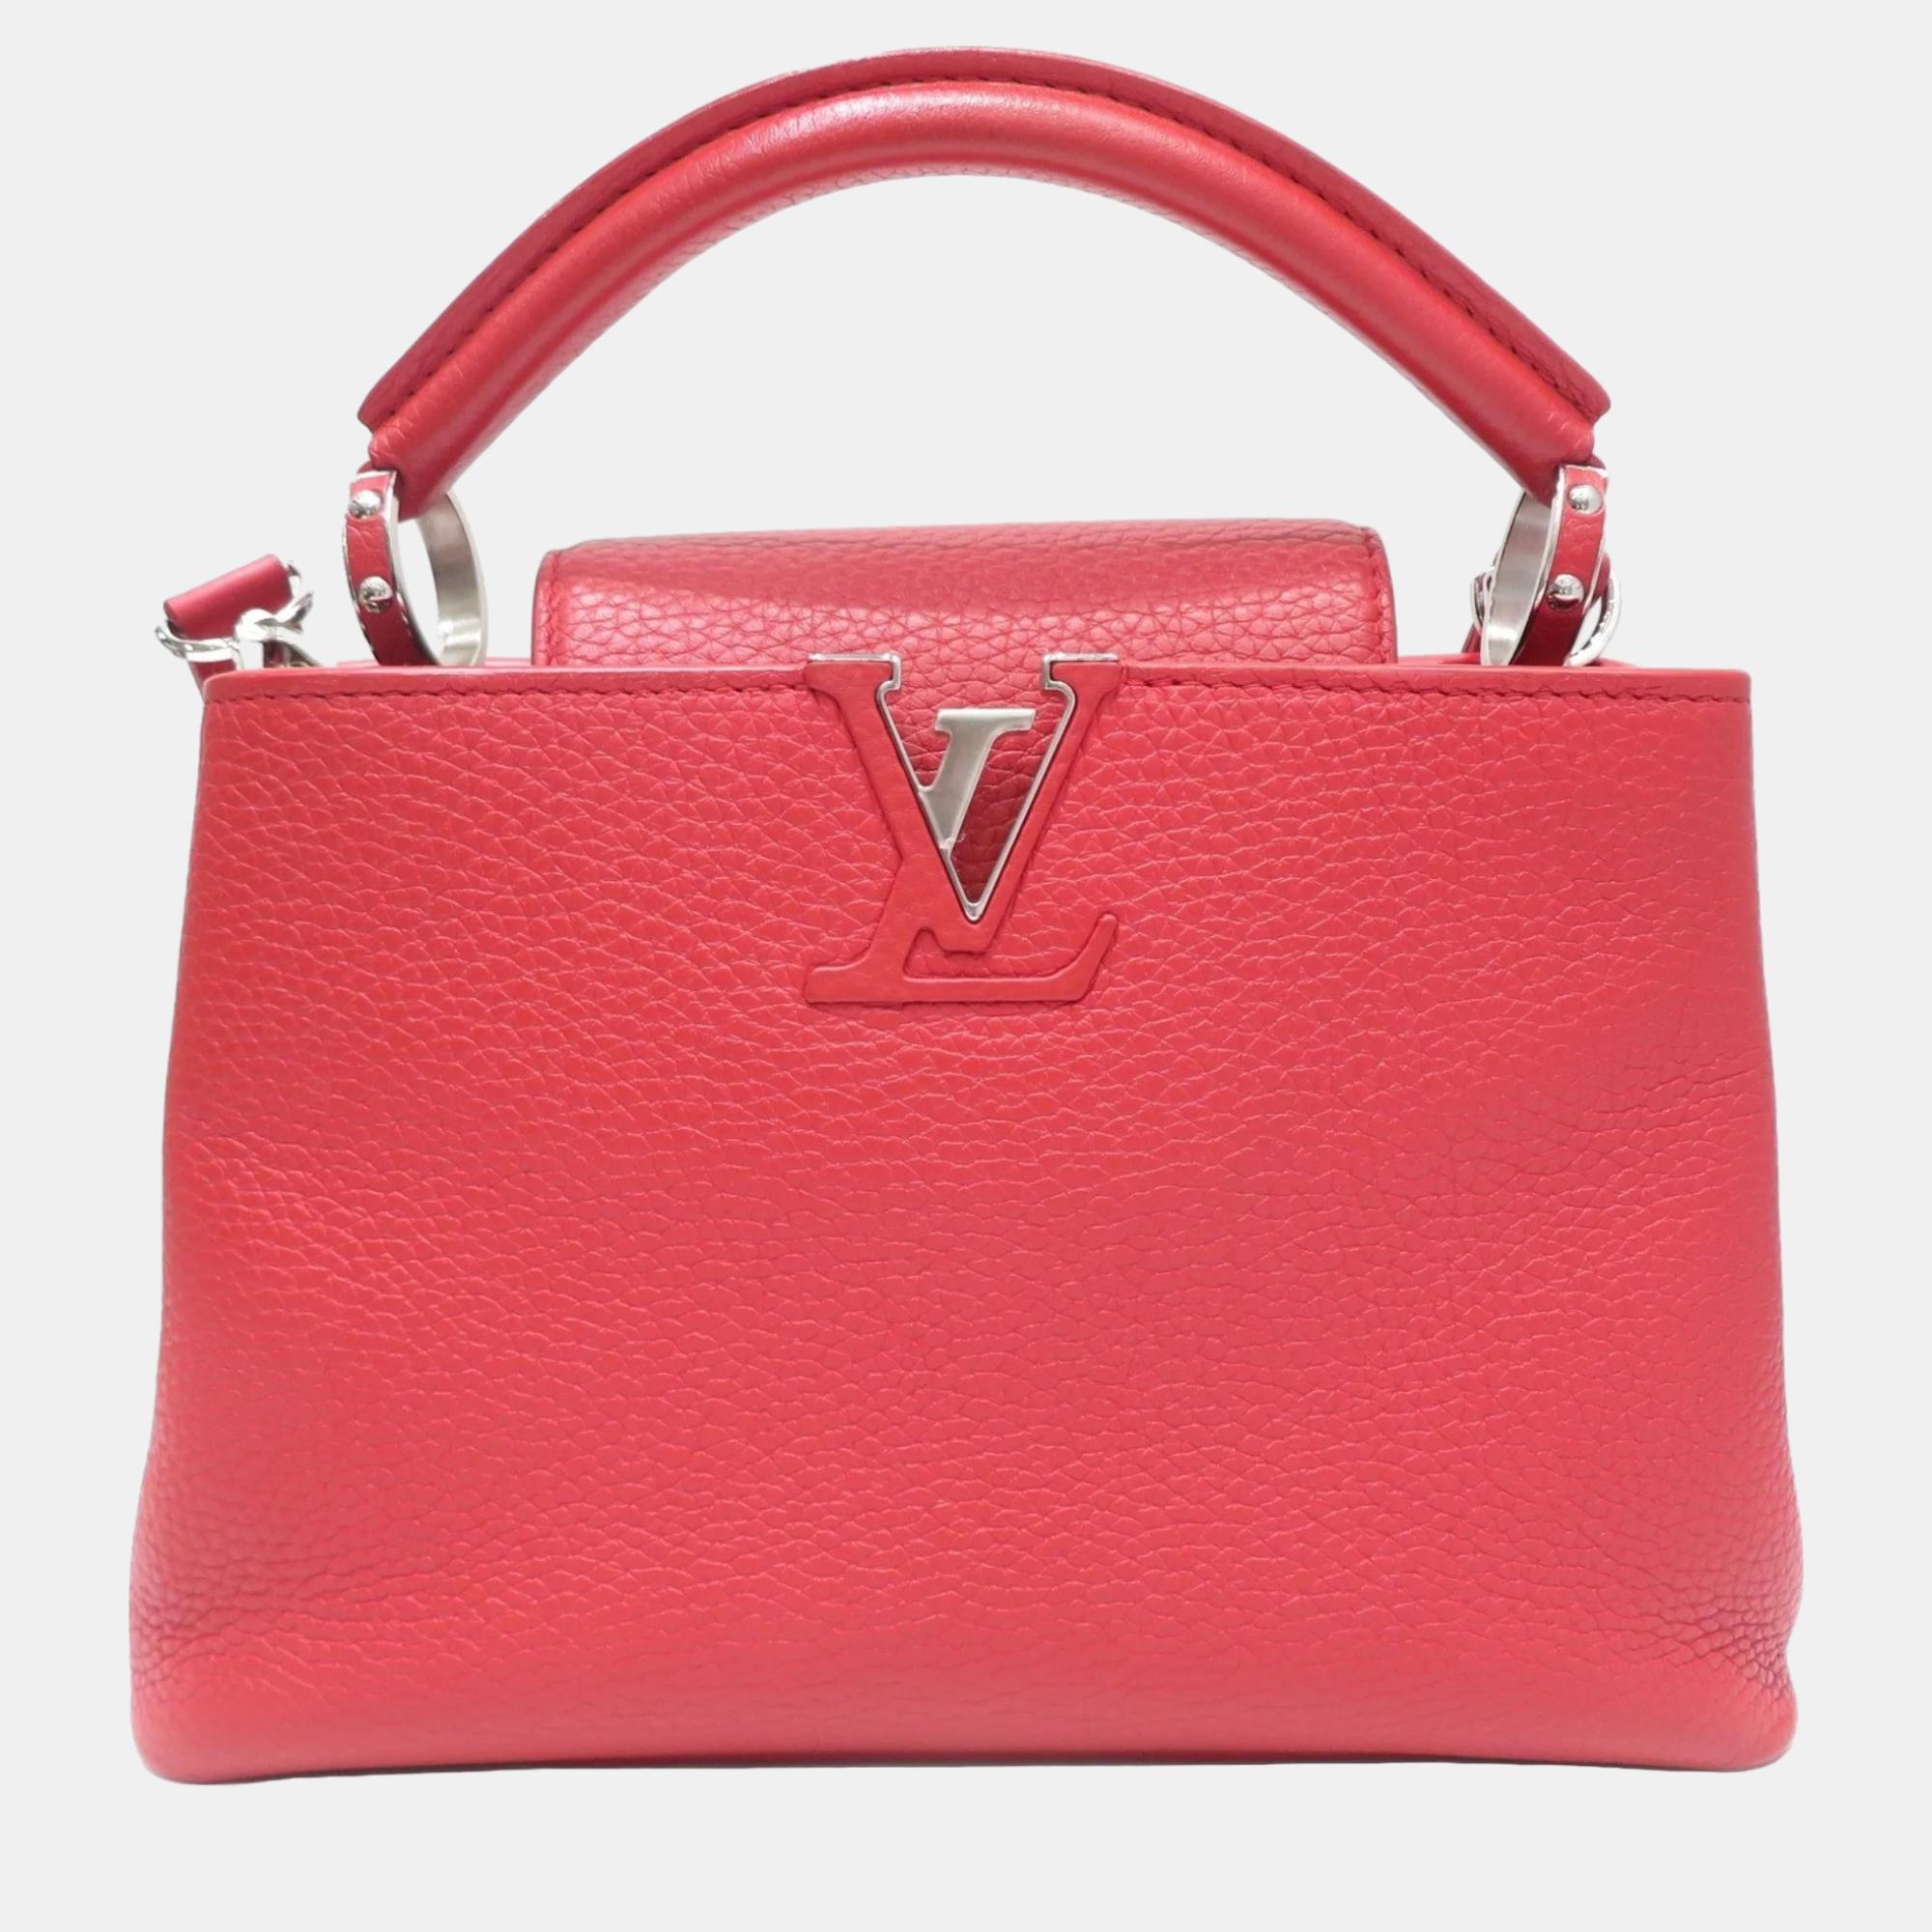 Louis vuitton red leather xs capucines top handle bags